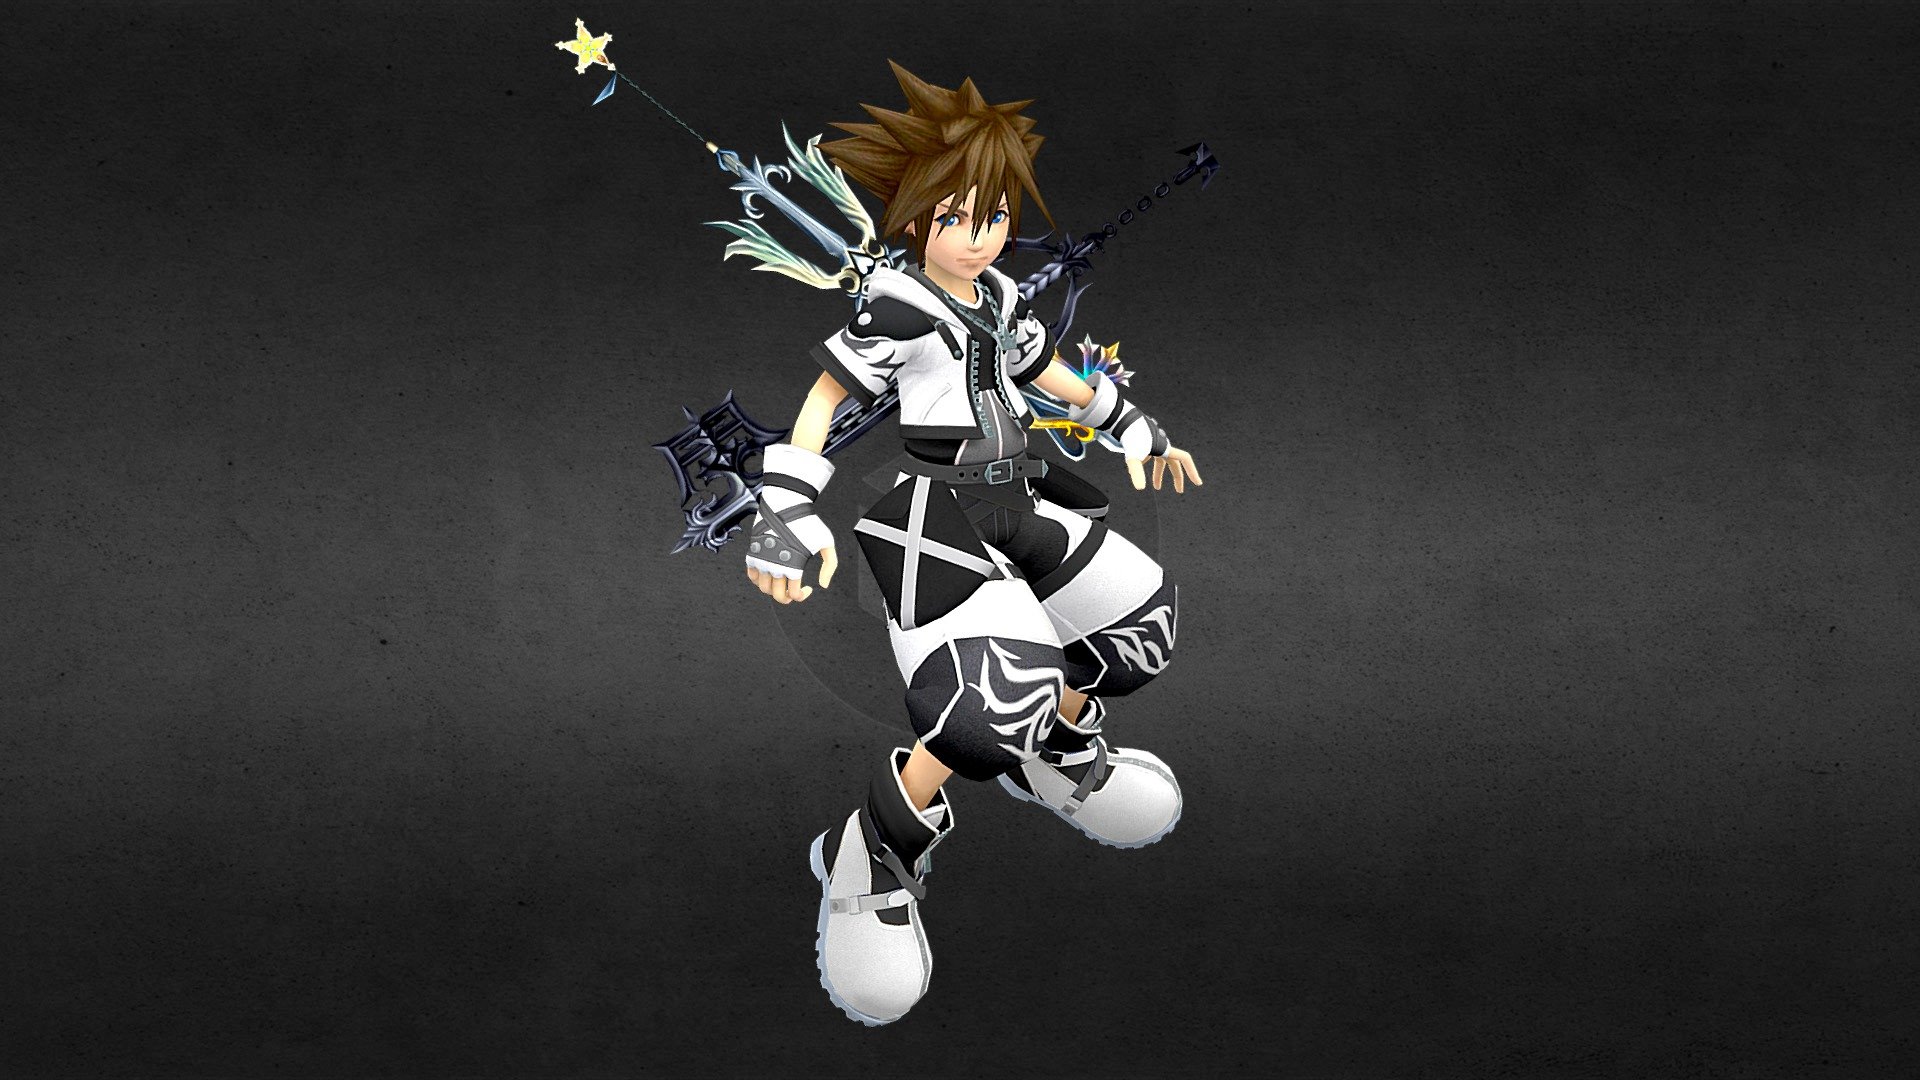 My recreation of Sora's Final Form art from KH2/KH2FM using the SSBU model and kh2 hair

no you can't DL this

I'd a appreciate if you gave this post a like, and that you follow me on sketchfab - Sora (Final Form Art) SSBU Styled - 3D model by MG64 (@mariogamer64) 3d model